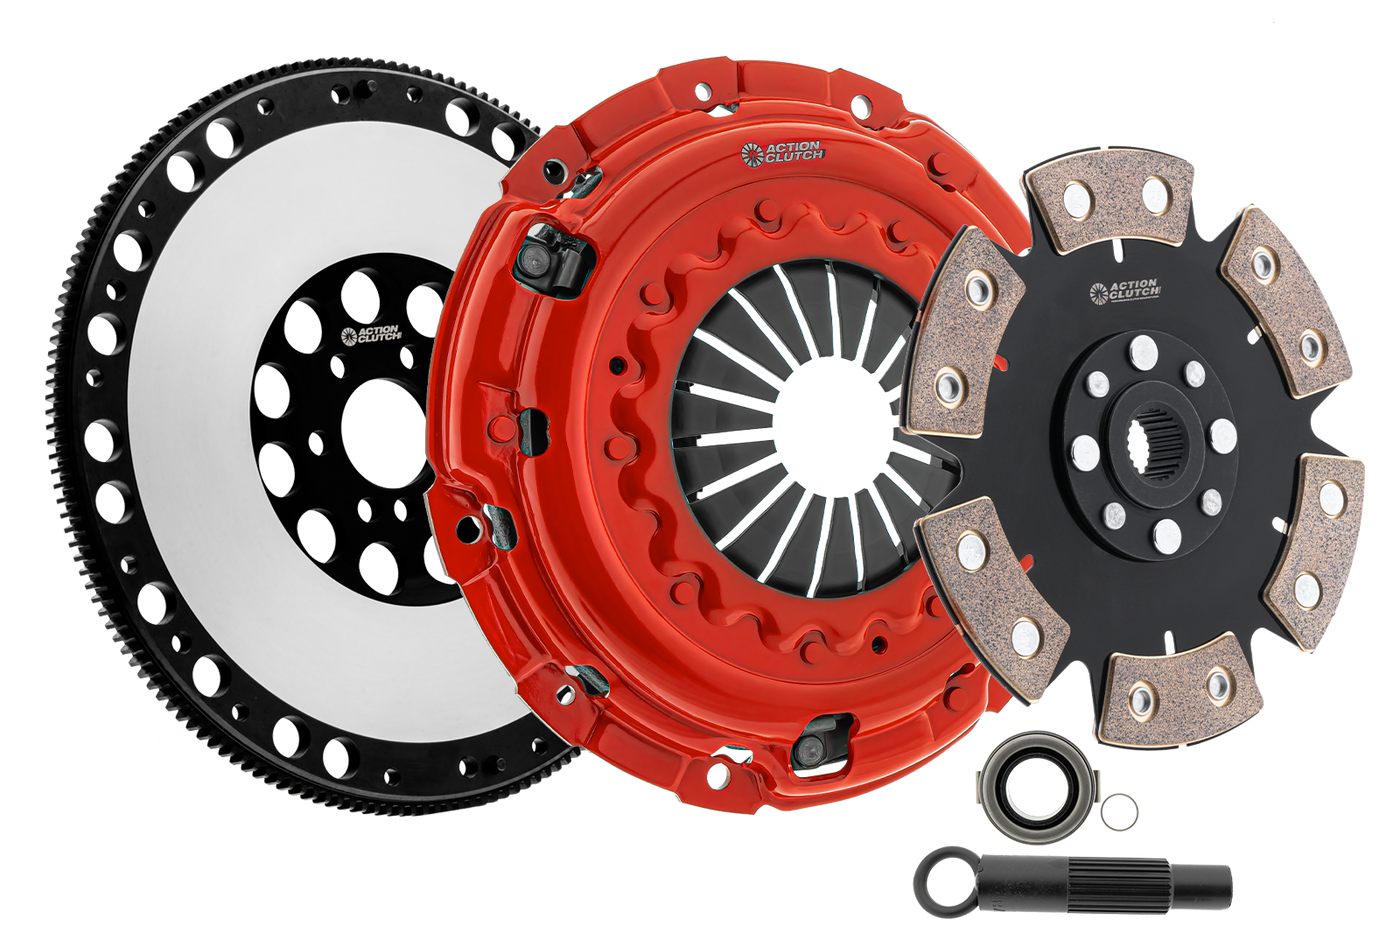 Stage 6 Clutch Kit (2MD) for BMW 330Xi 2001-2003 3.0L DOHC (M54) 5 Speed Only RWD Includes Lightened Flywheel